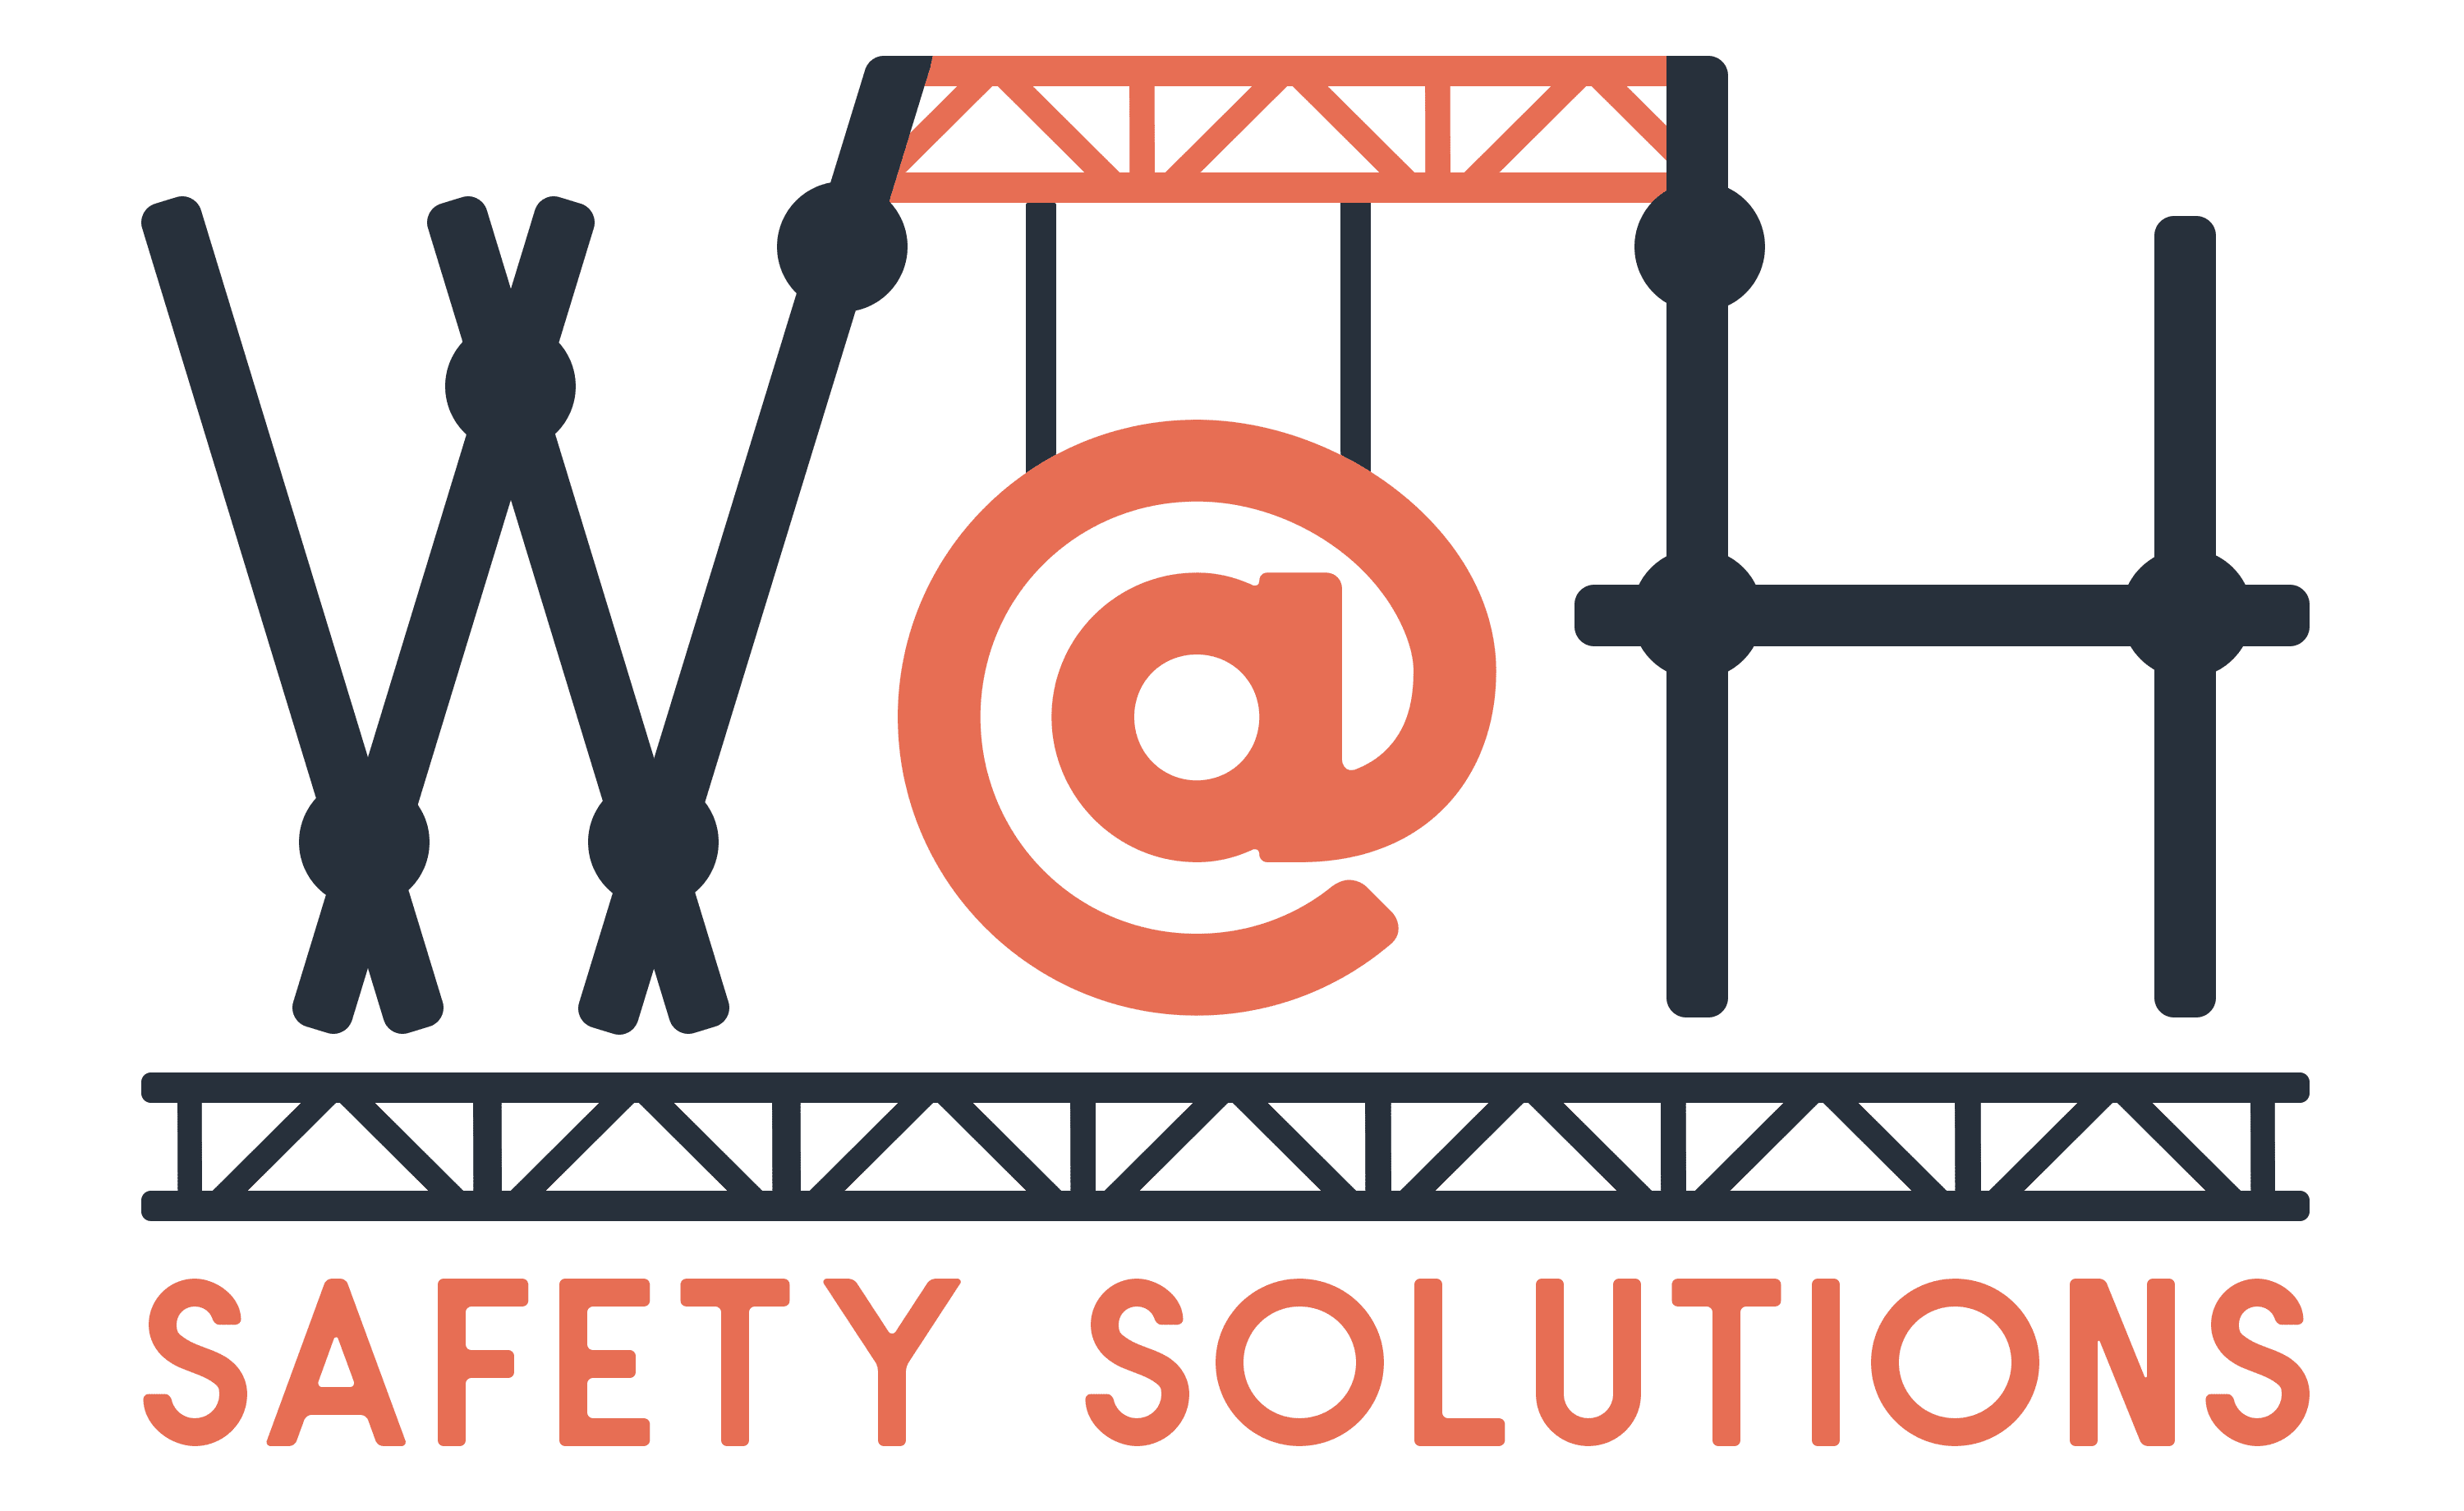 Working At Heights Logo